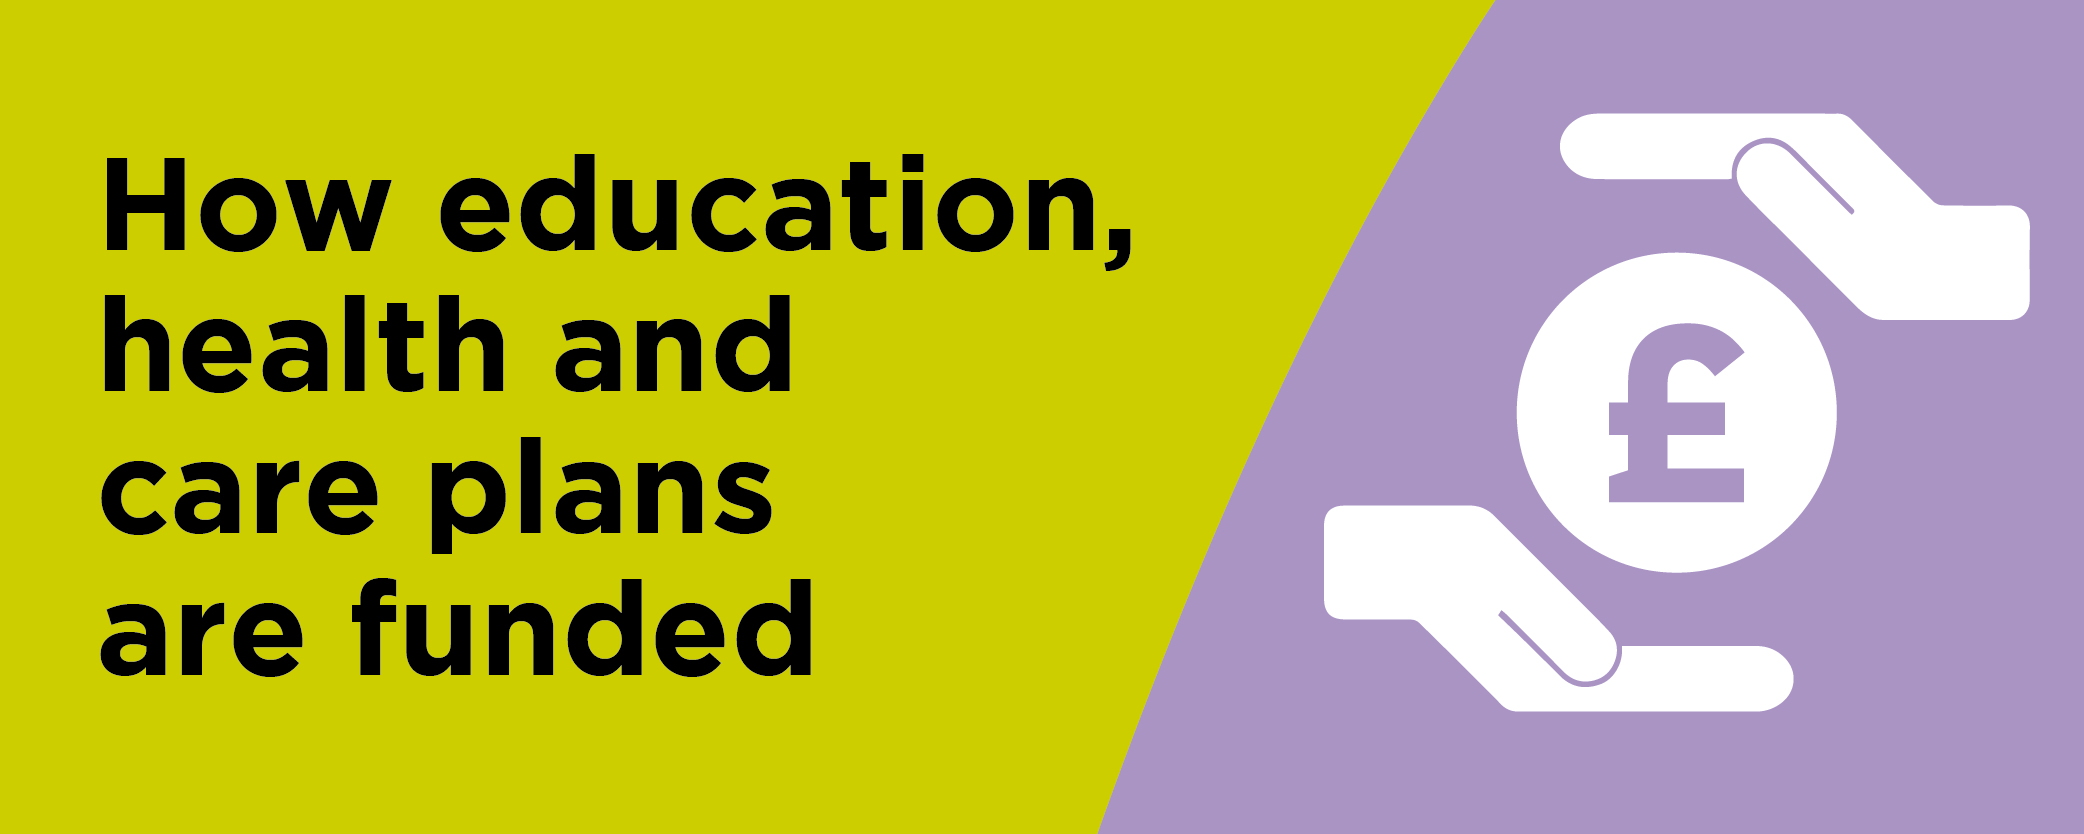 How Education, Health and Care Plans are funded